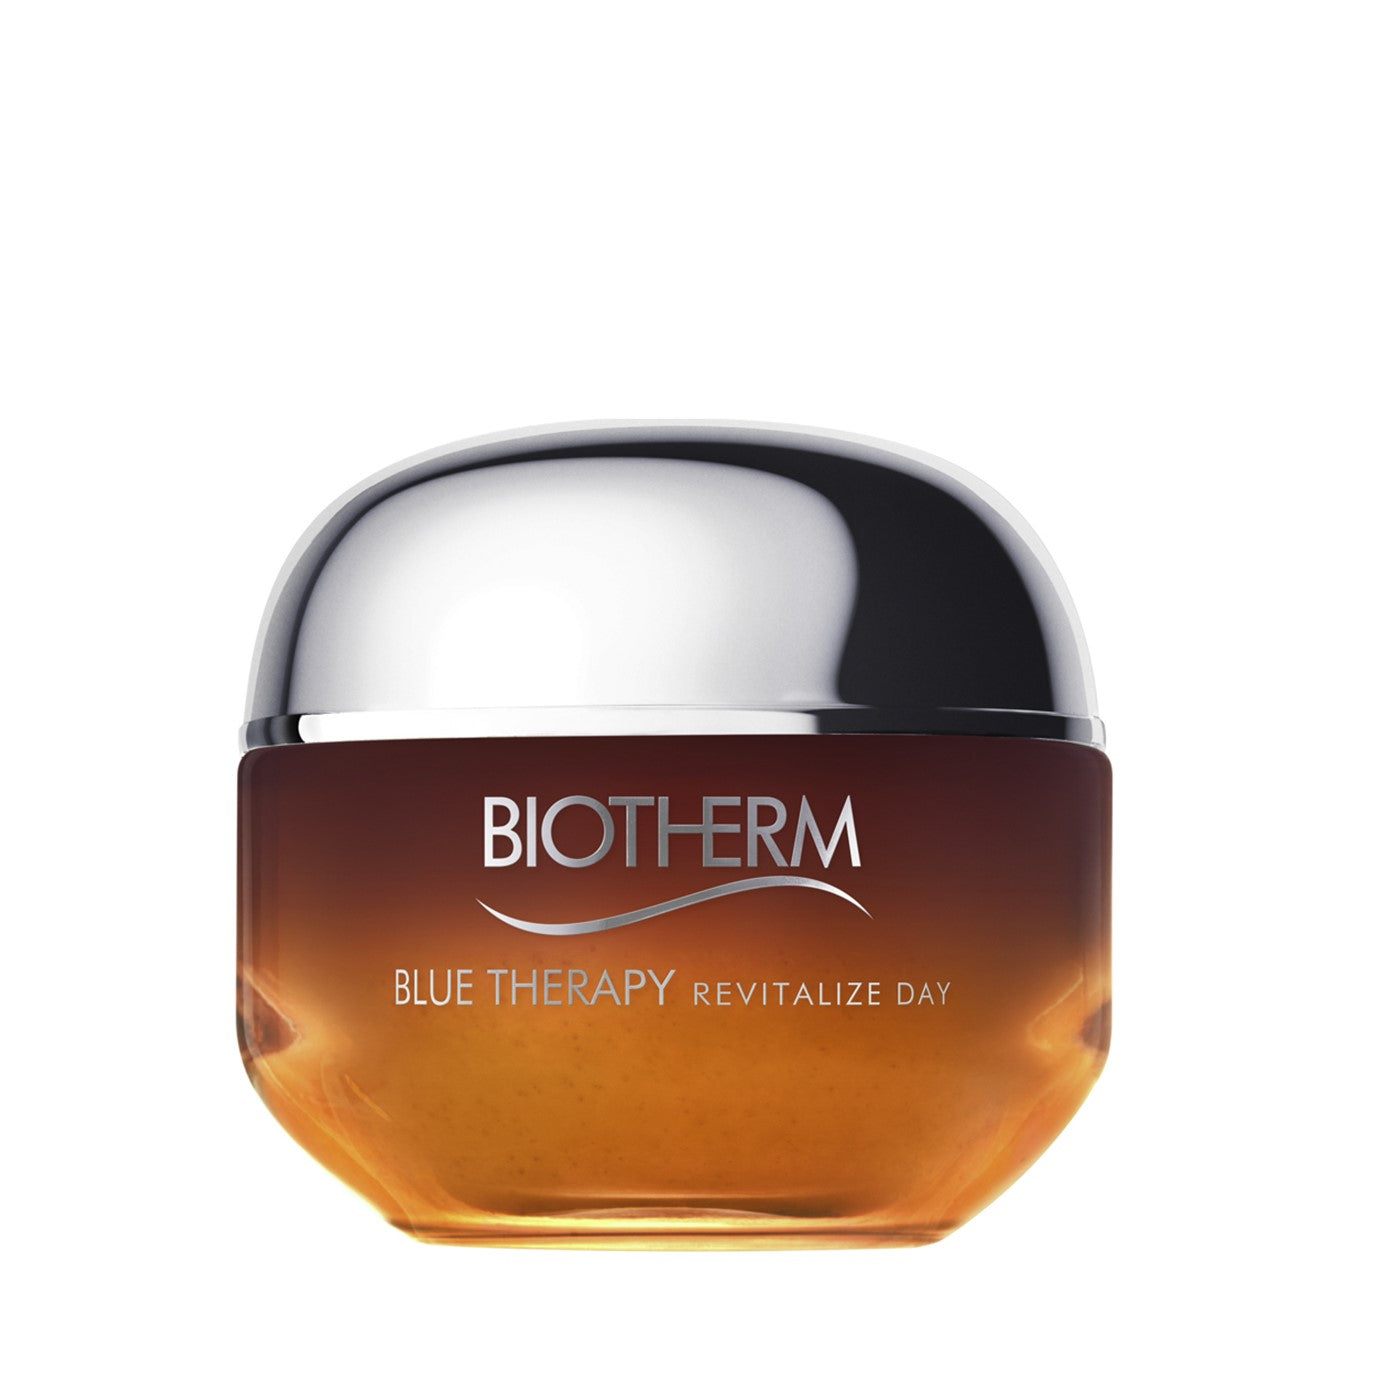 BIOTHERM BLUE THERAPY REVITALIZE DAY CREAM 50ML | Beauty Bar